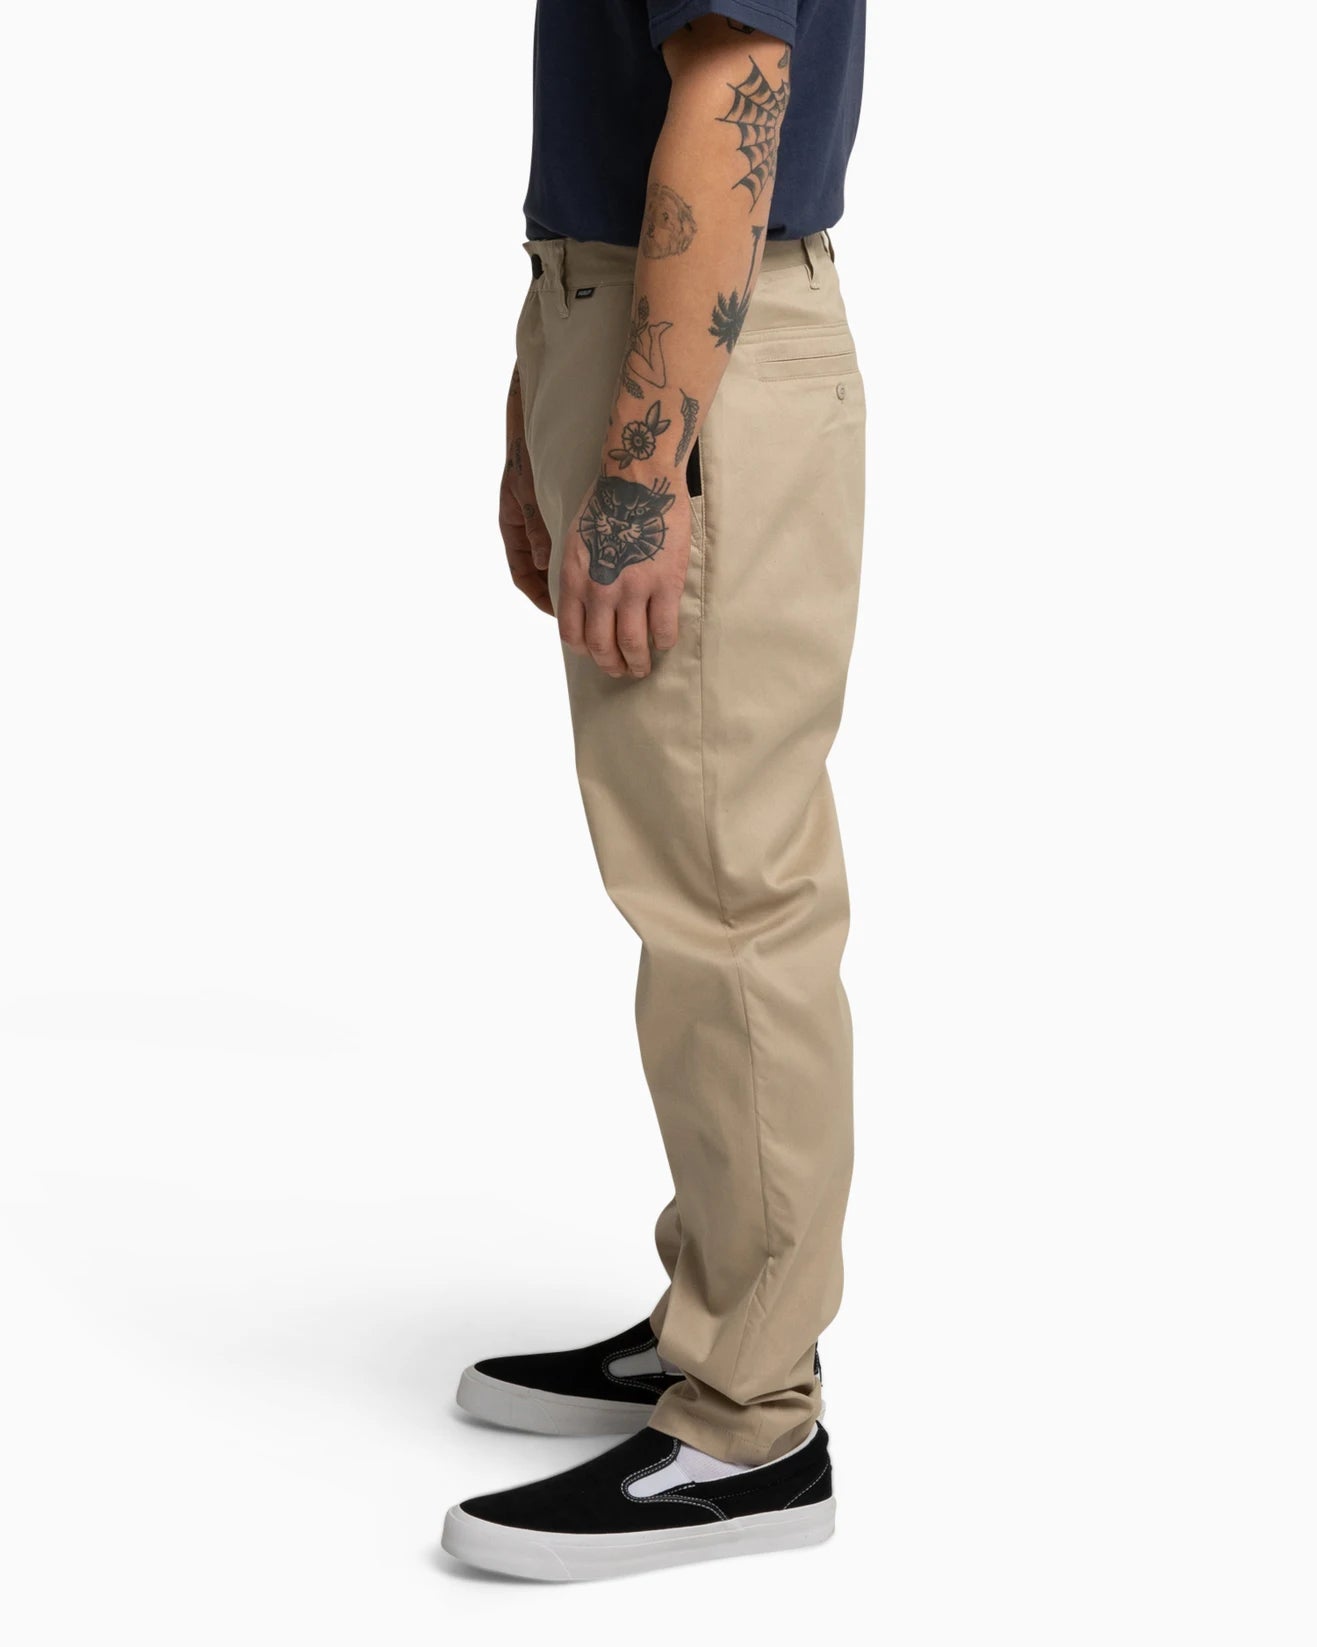 Hurley Dri Fit Worker Pant Trench